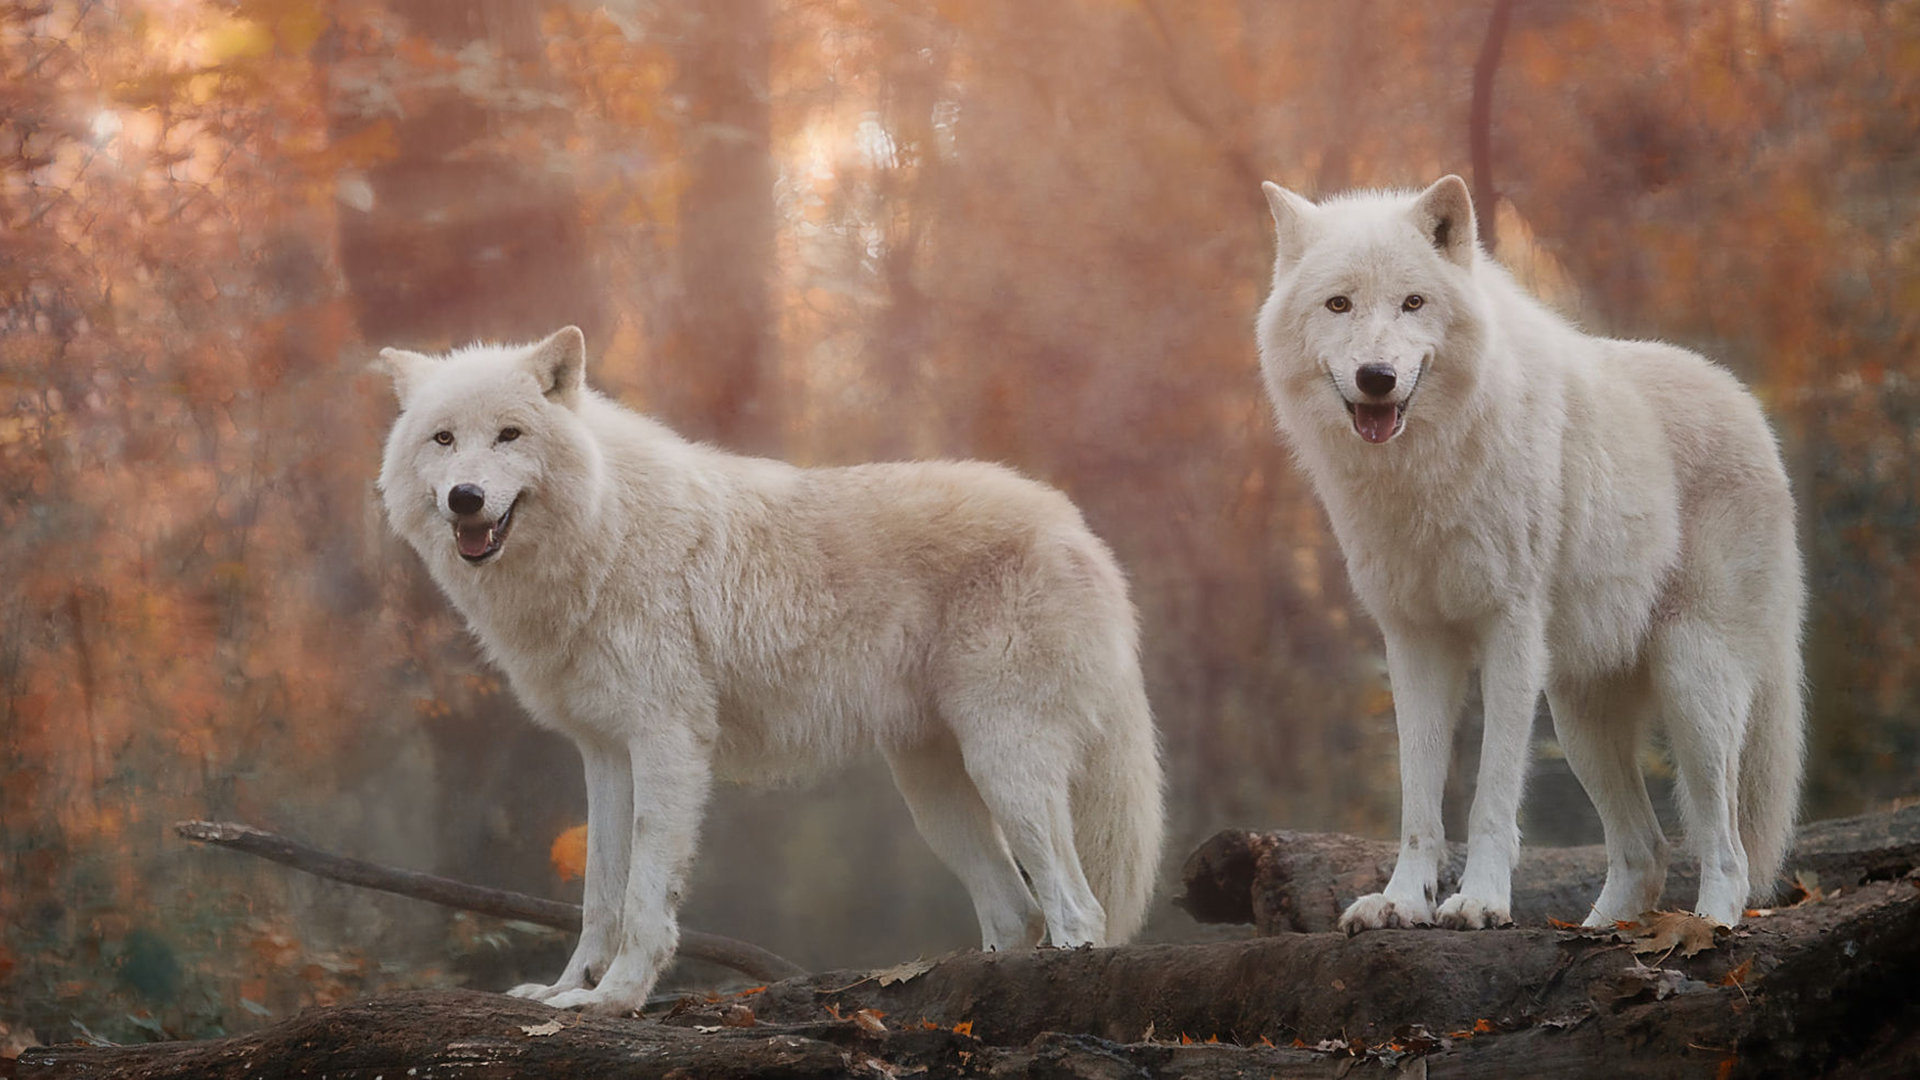 Download 1080p White Wolf Computer Wallpaper Id - Desktop Backgrounds Wolf Wallpaper Hd - HD Wallpaper 